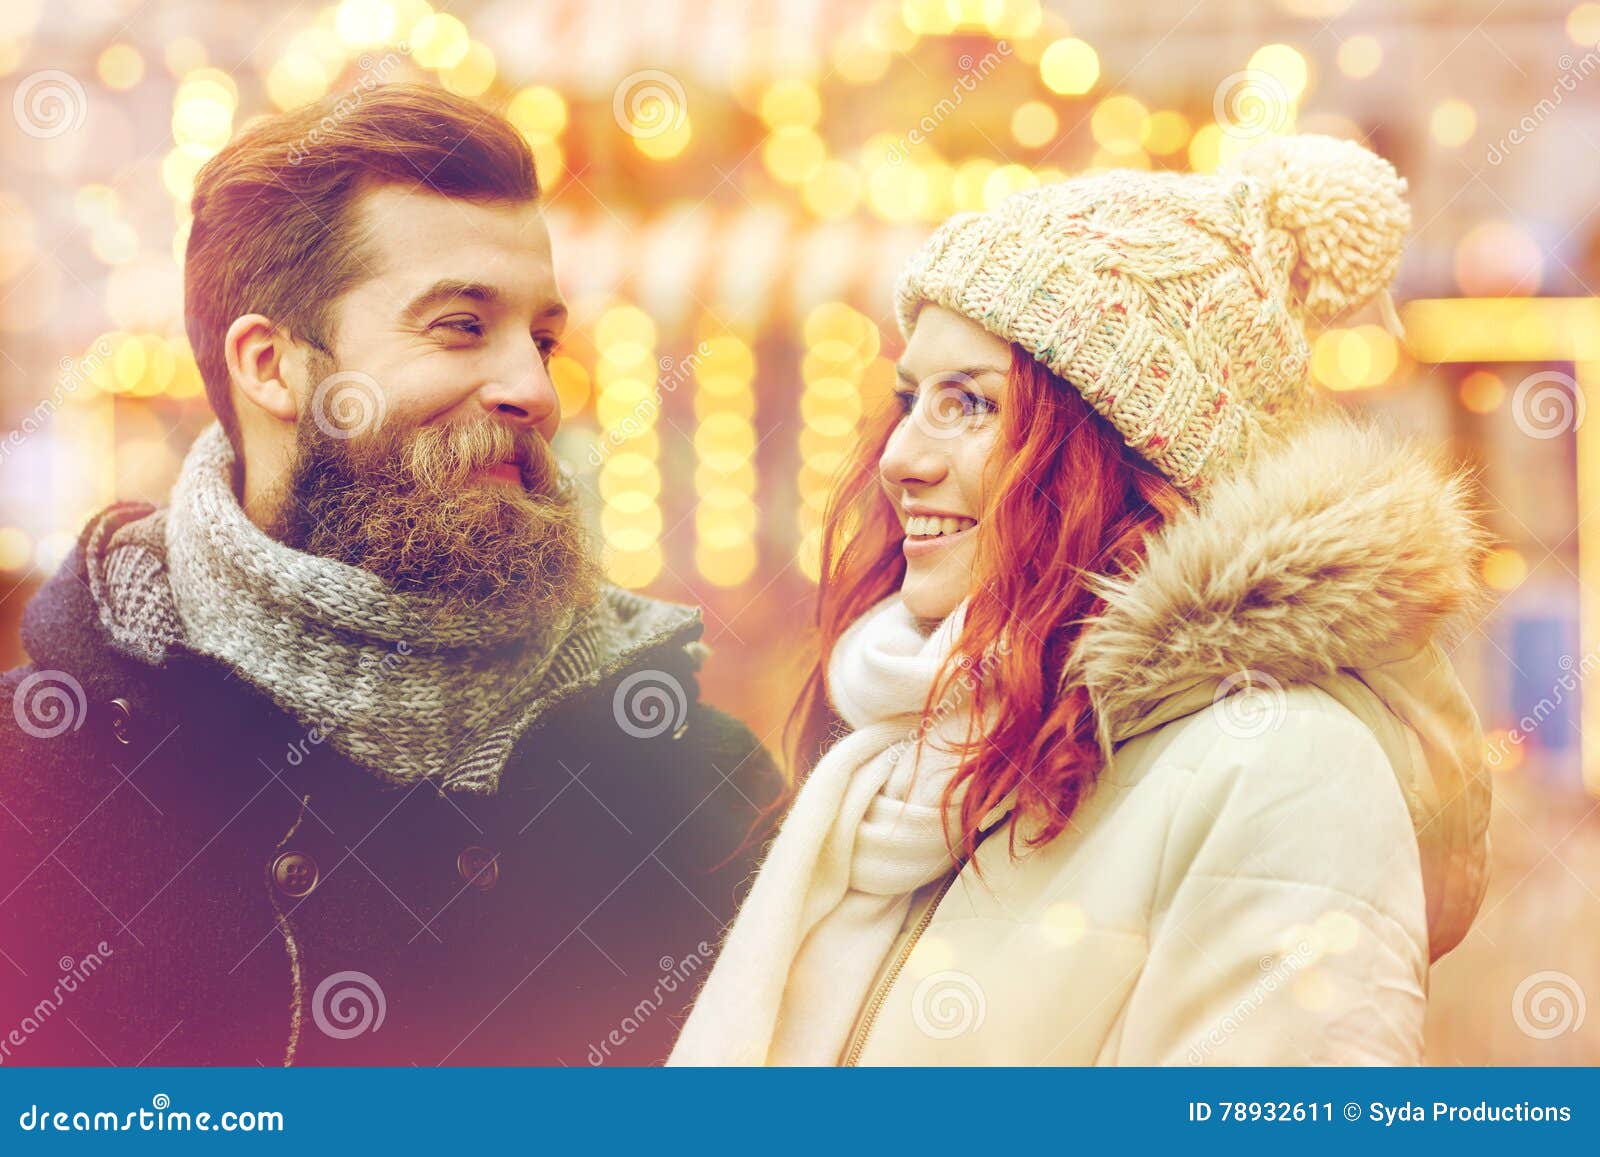 Happy Couple Walking in Old Town Stock Image - Image of love, people ...